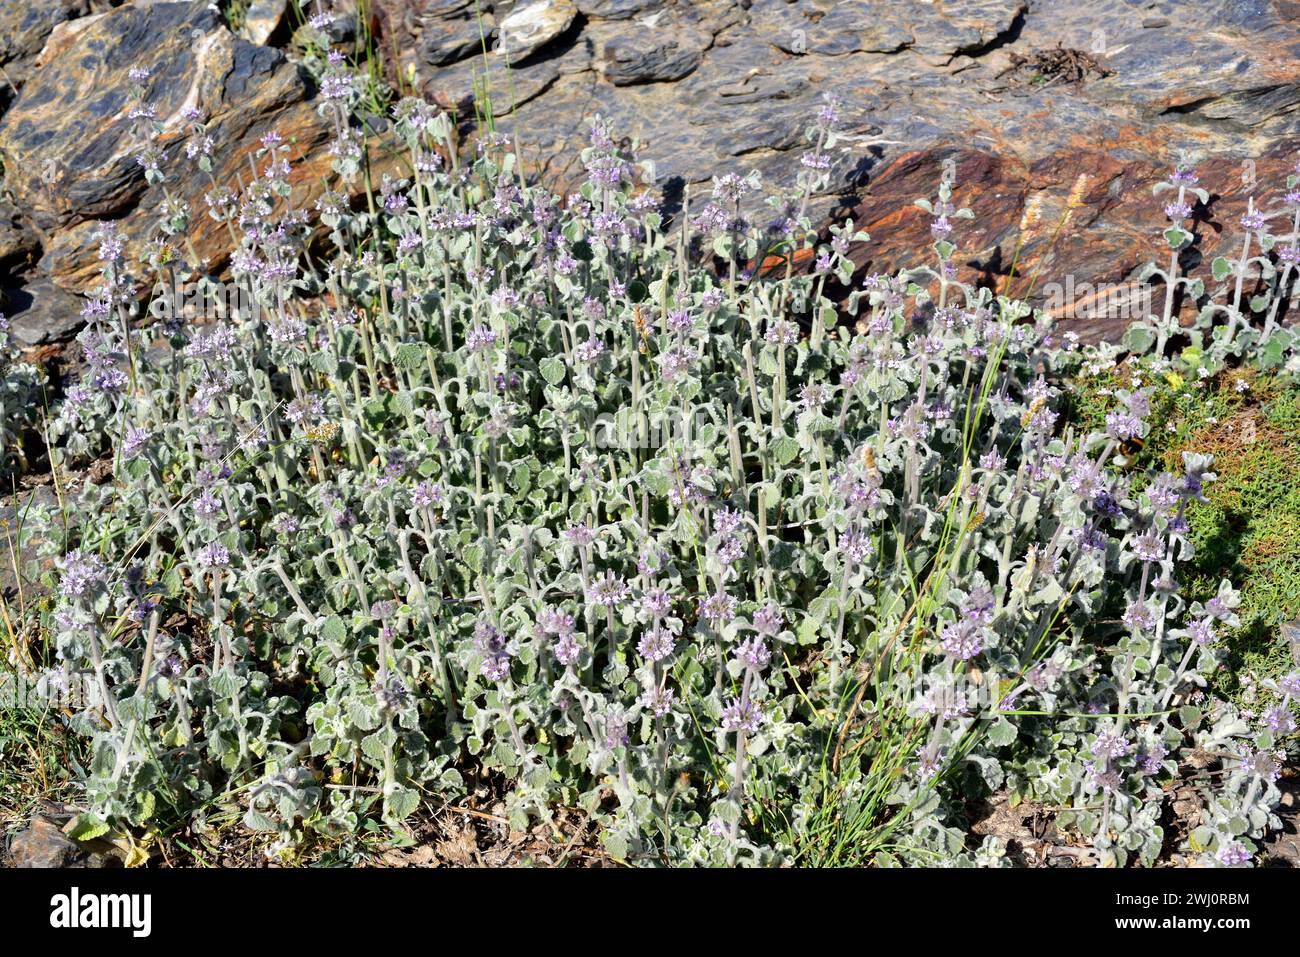 Marrubio nevado (Marrubium supinum) is a perennial herb endemic to eastern Spain and north western Africa. This photo was taken in Sierra Nevada Natio Stock Photo